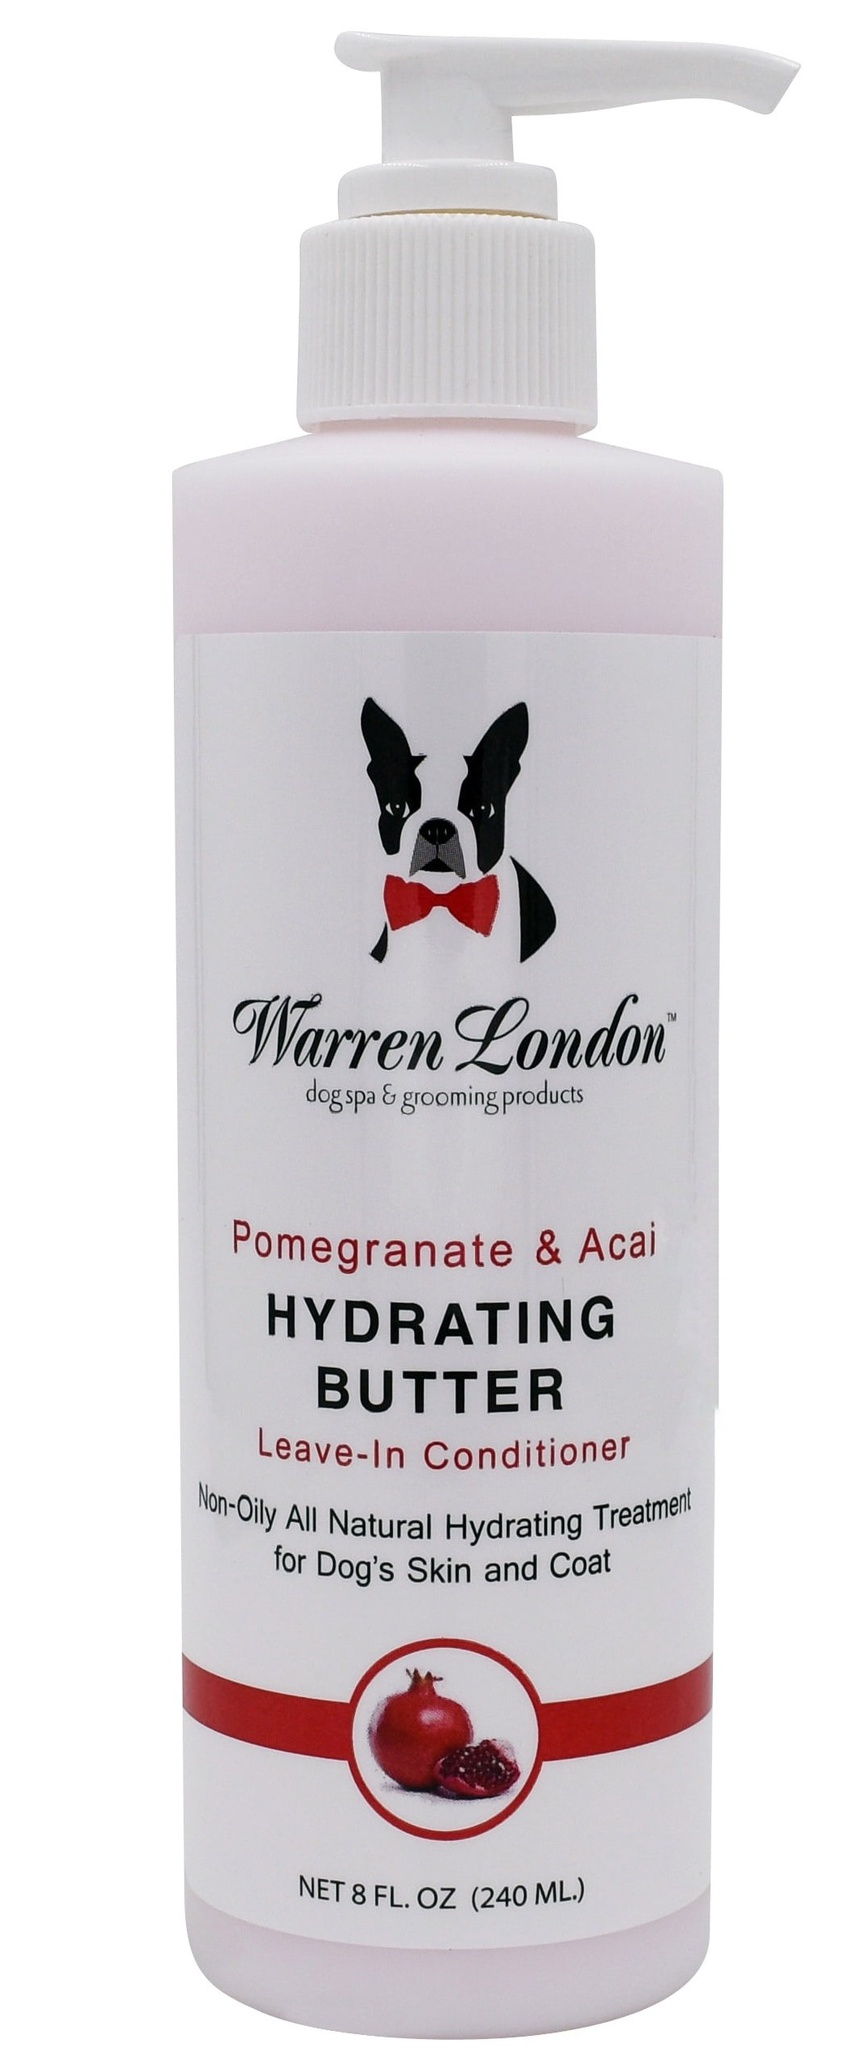 Warren London Pomegranate & Acai Hydrating Butter Leave-in Conditioner For Dogs